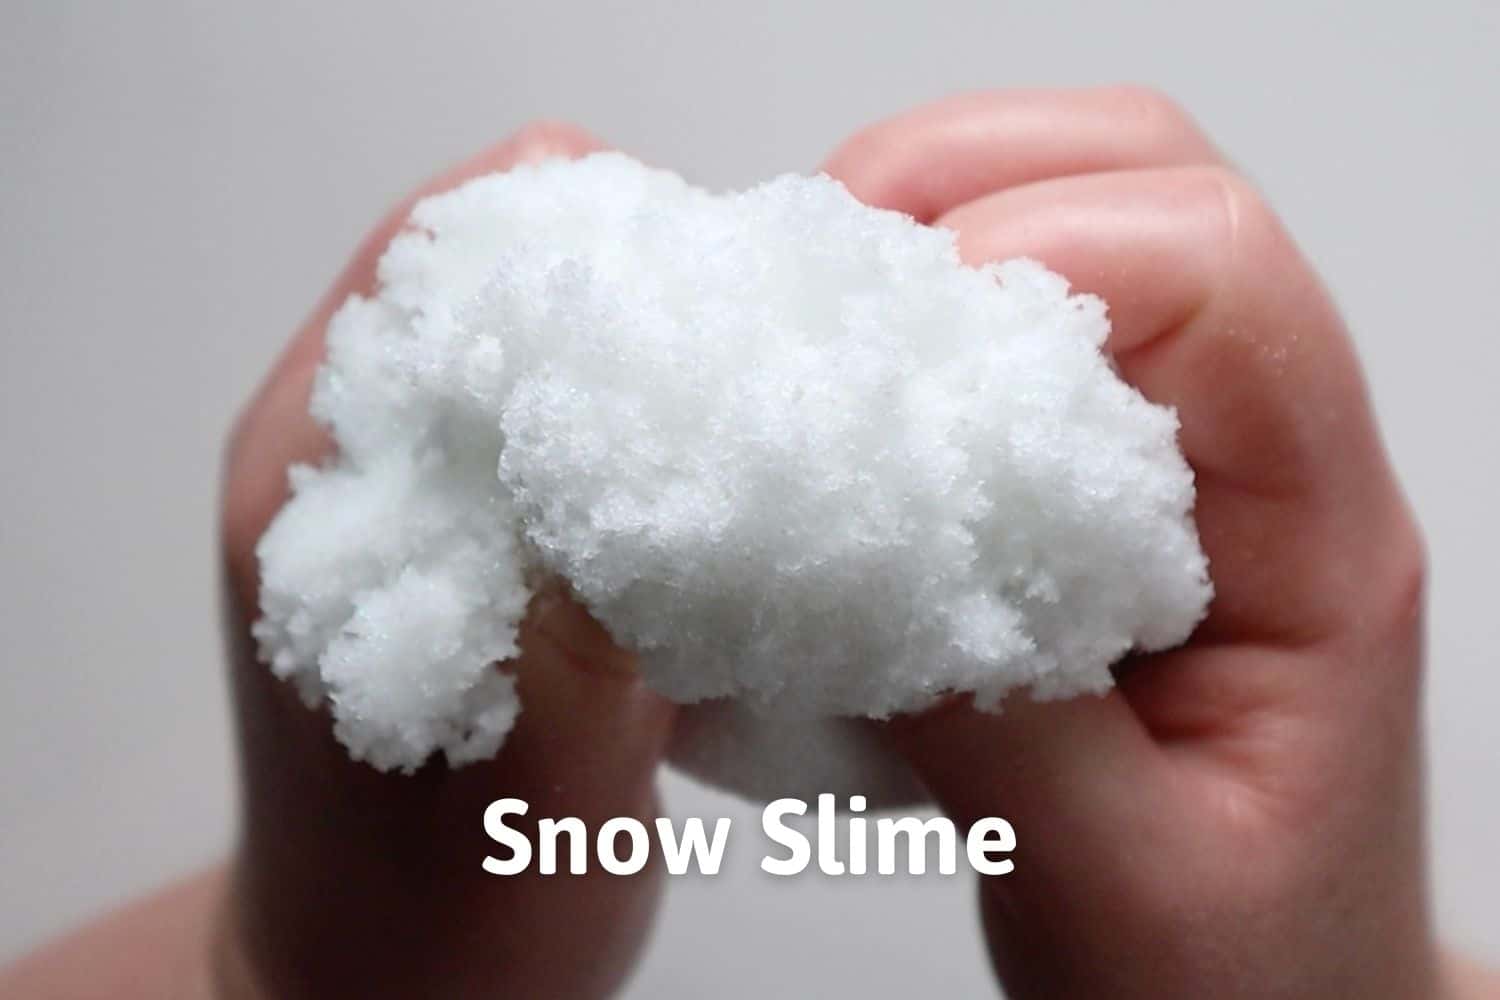 Snow Slime - How to Easily Make Fluffy Snow Slime - AB Crafty